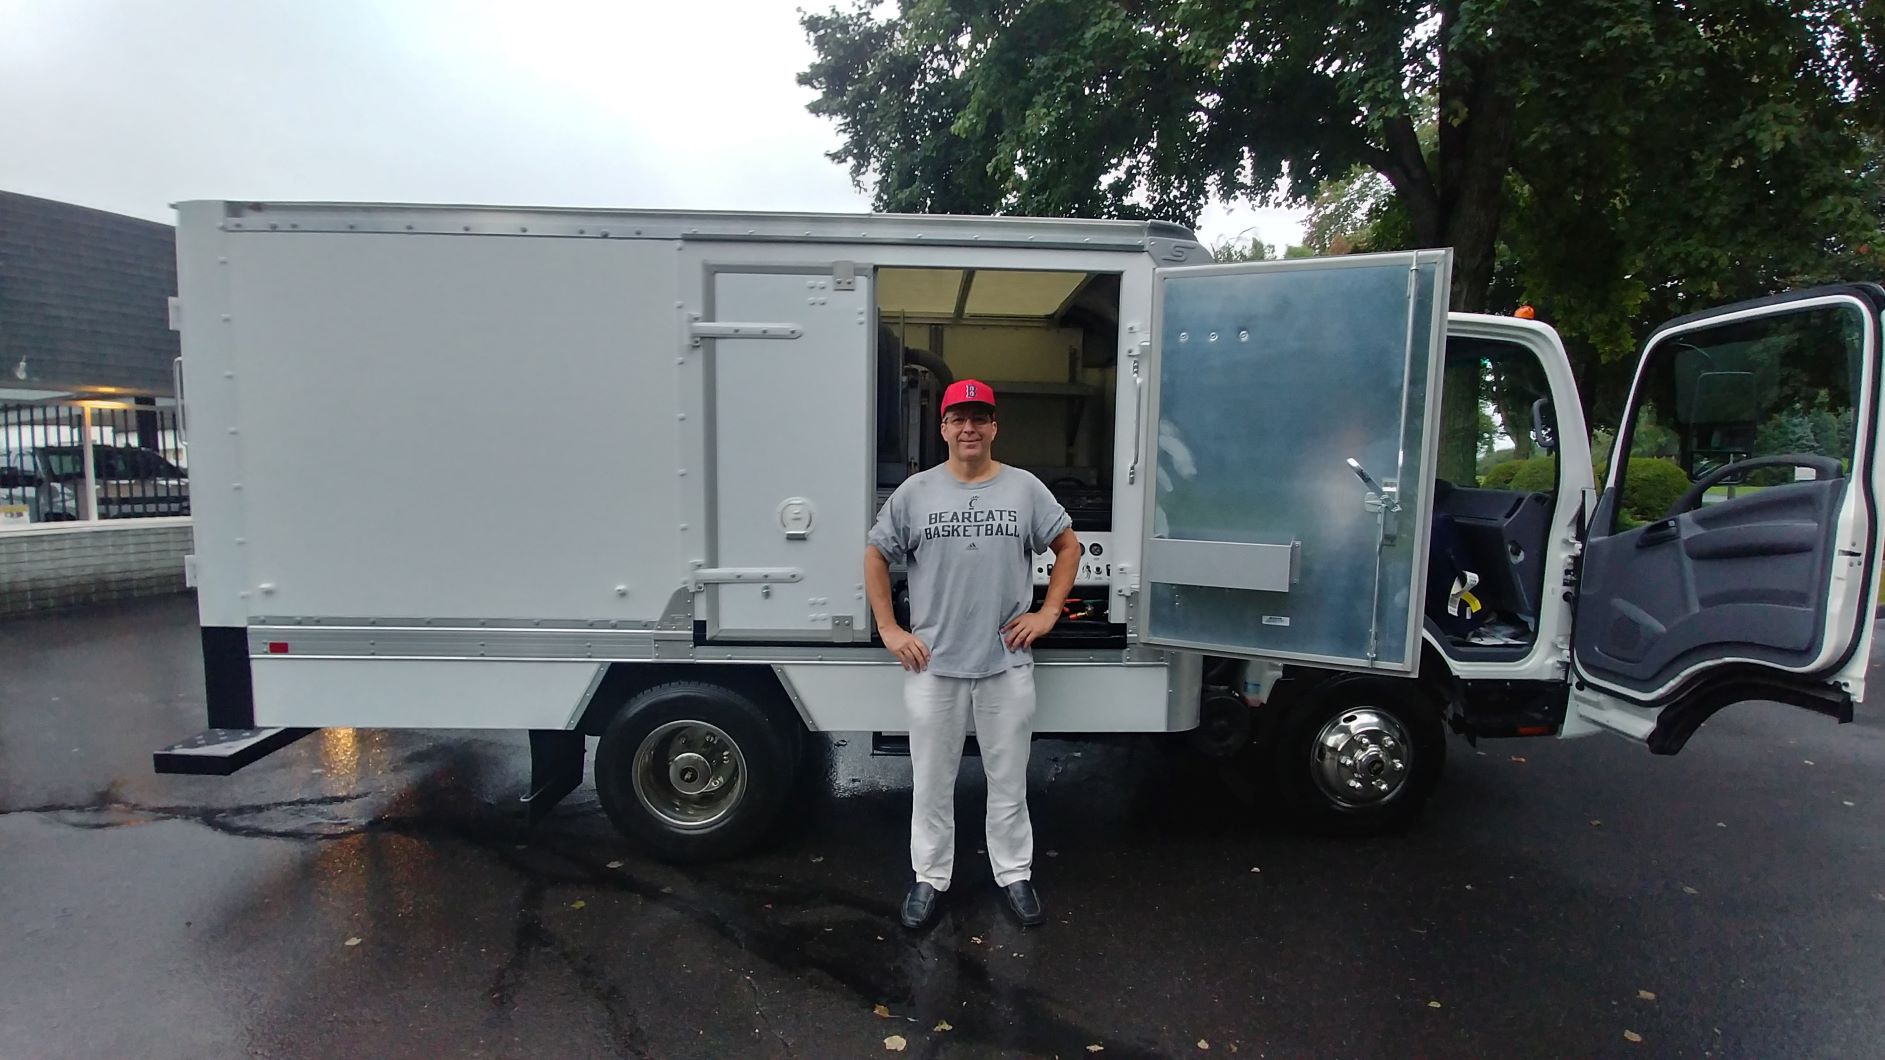 John Apke takes delivery of New Butler Carpet Cleaning Machine in Little Big Truck